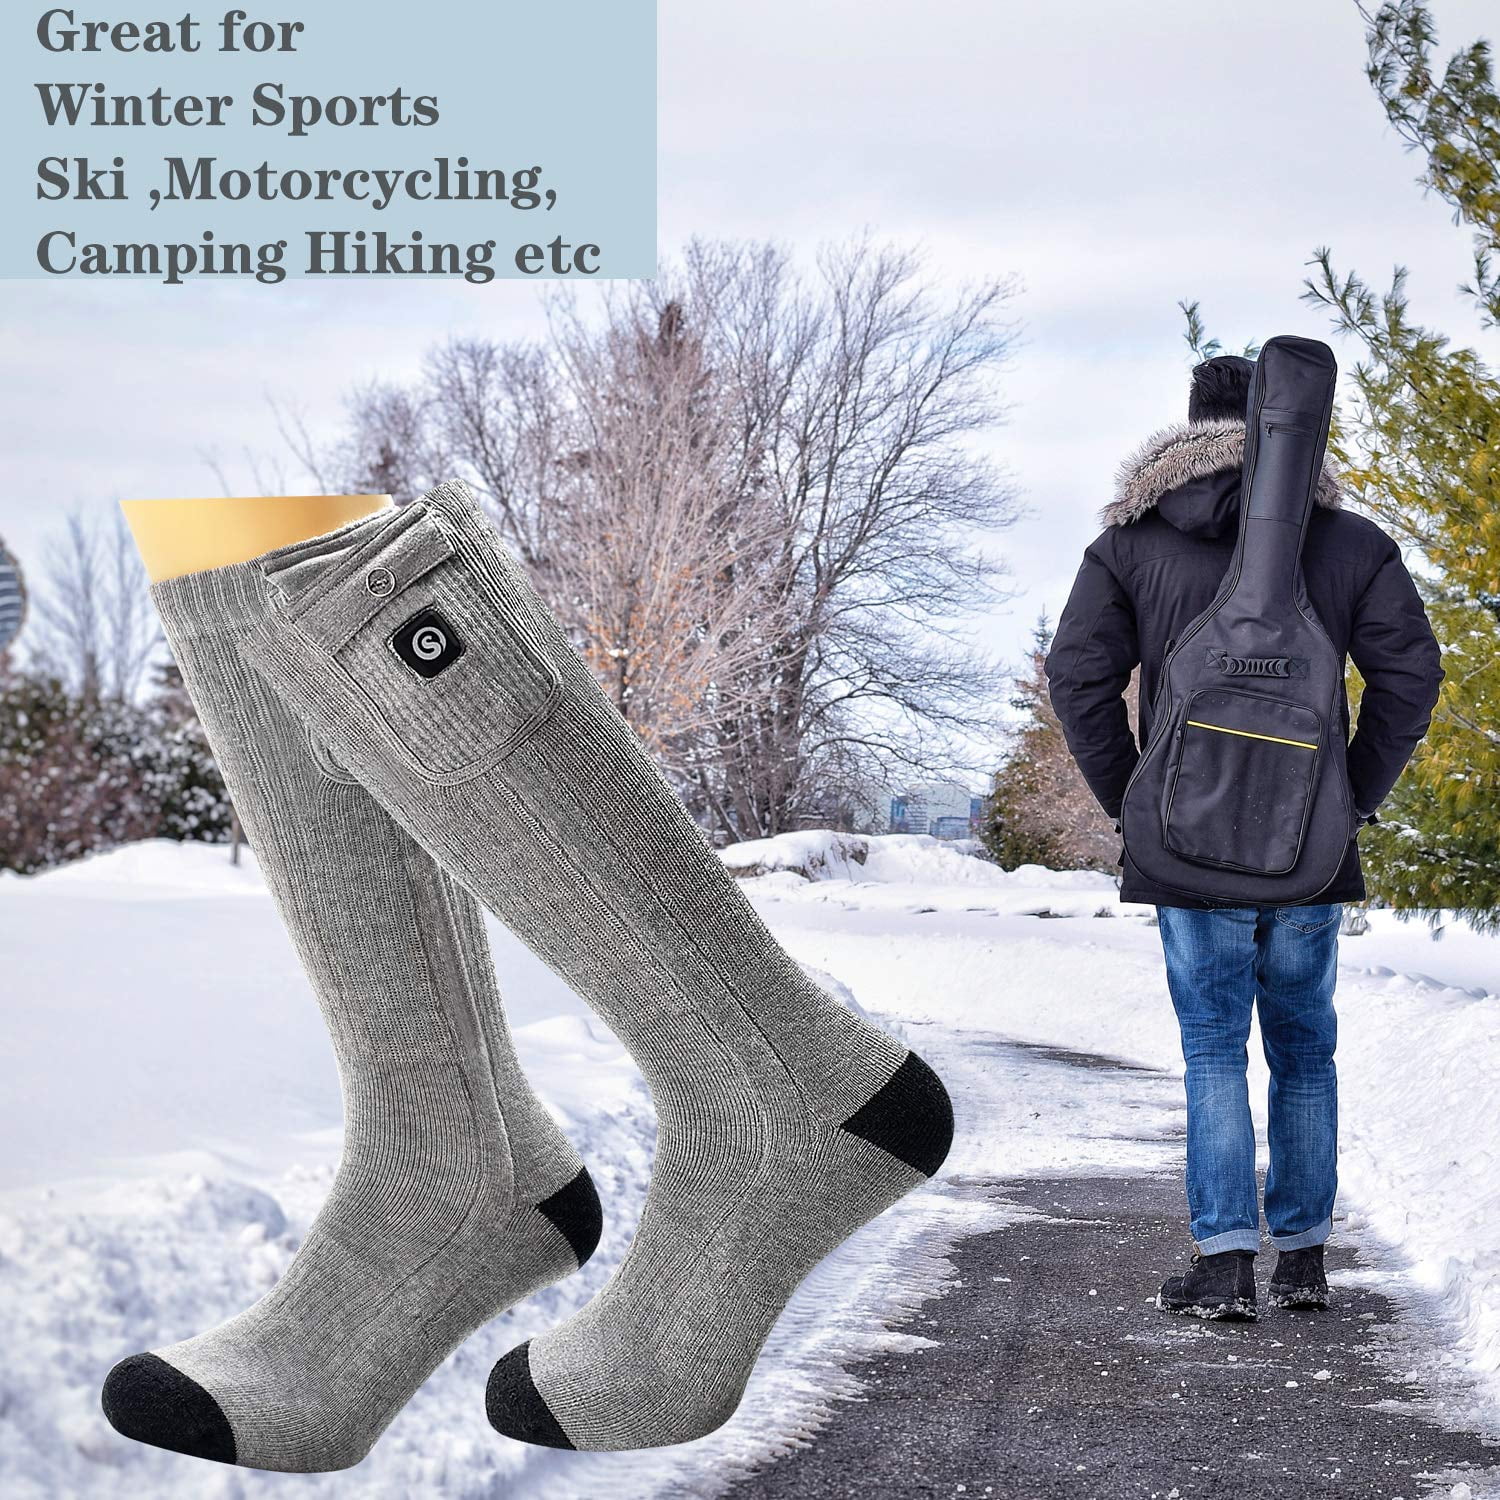 SNOW DEER Upgraded Heated Socks,7.4V 2200MAH Electric Rechargeable Battery 